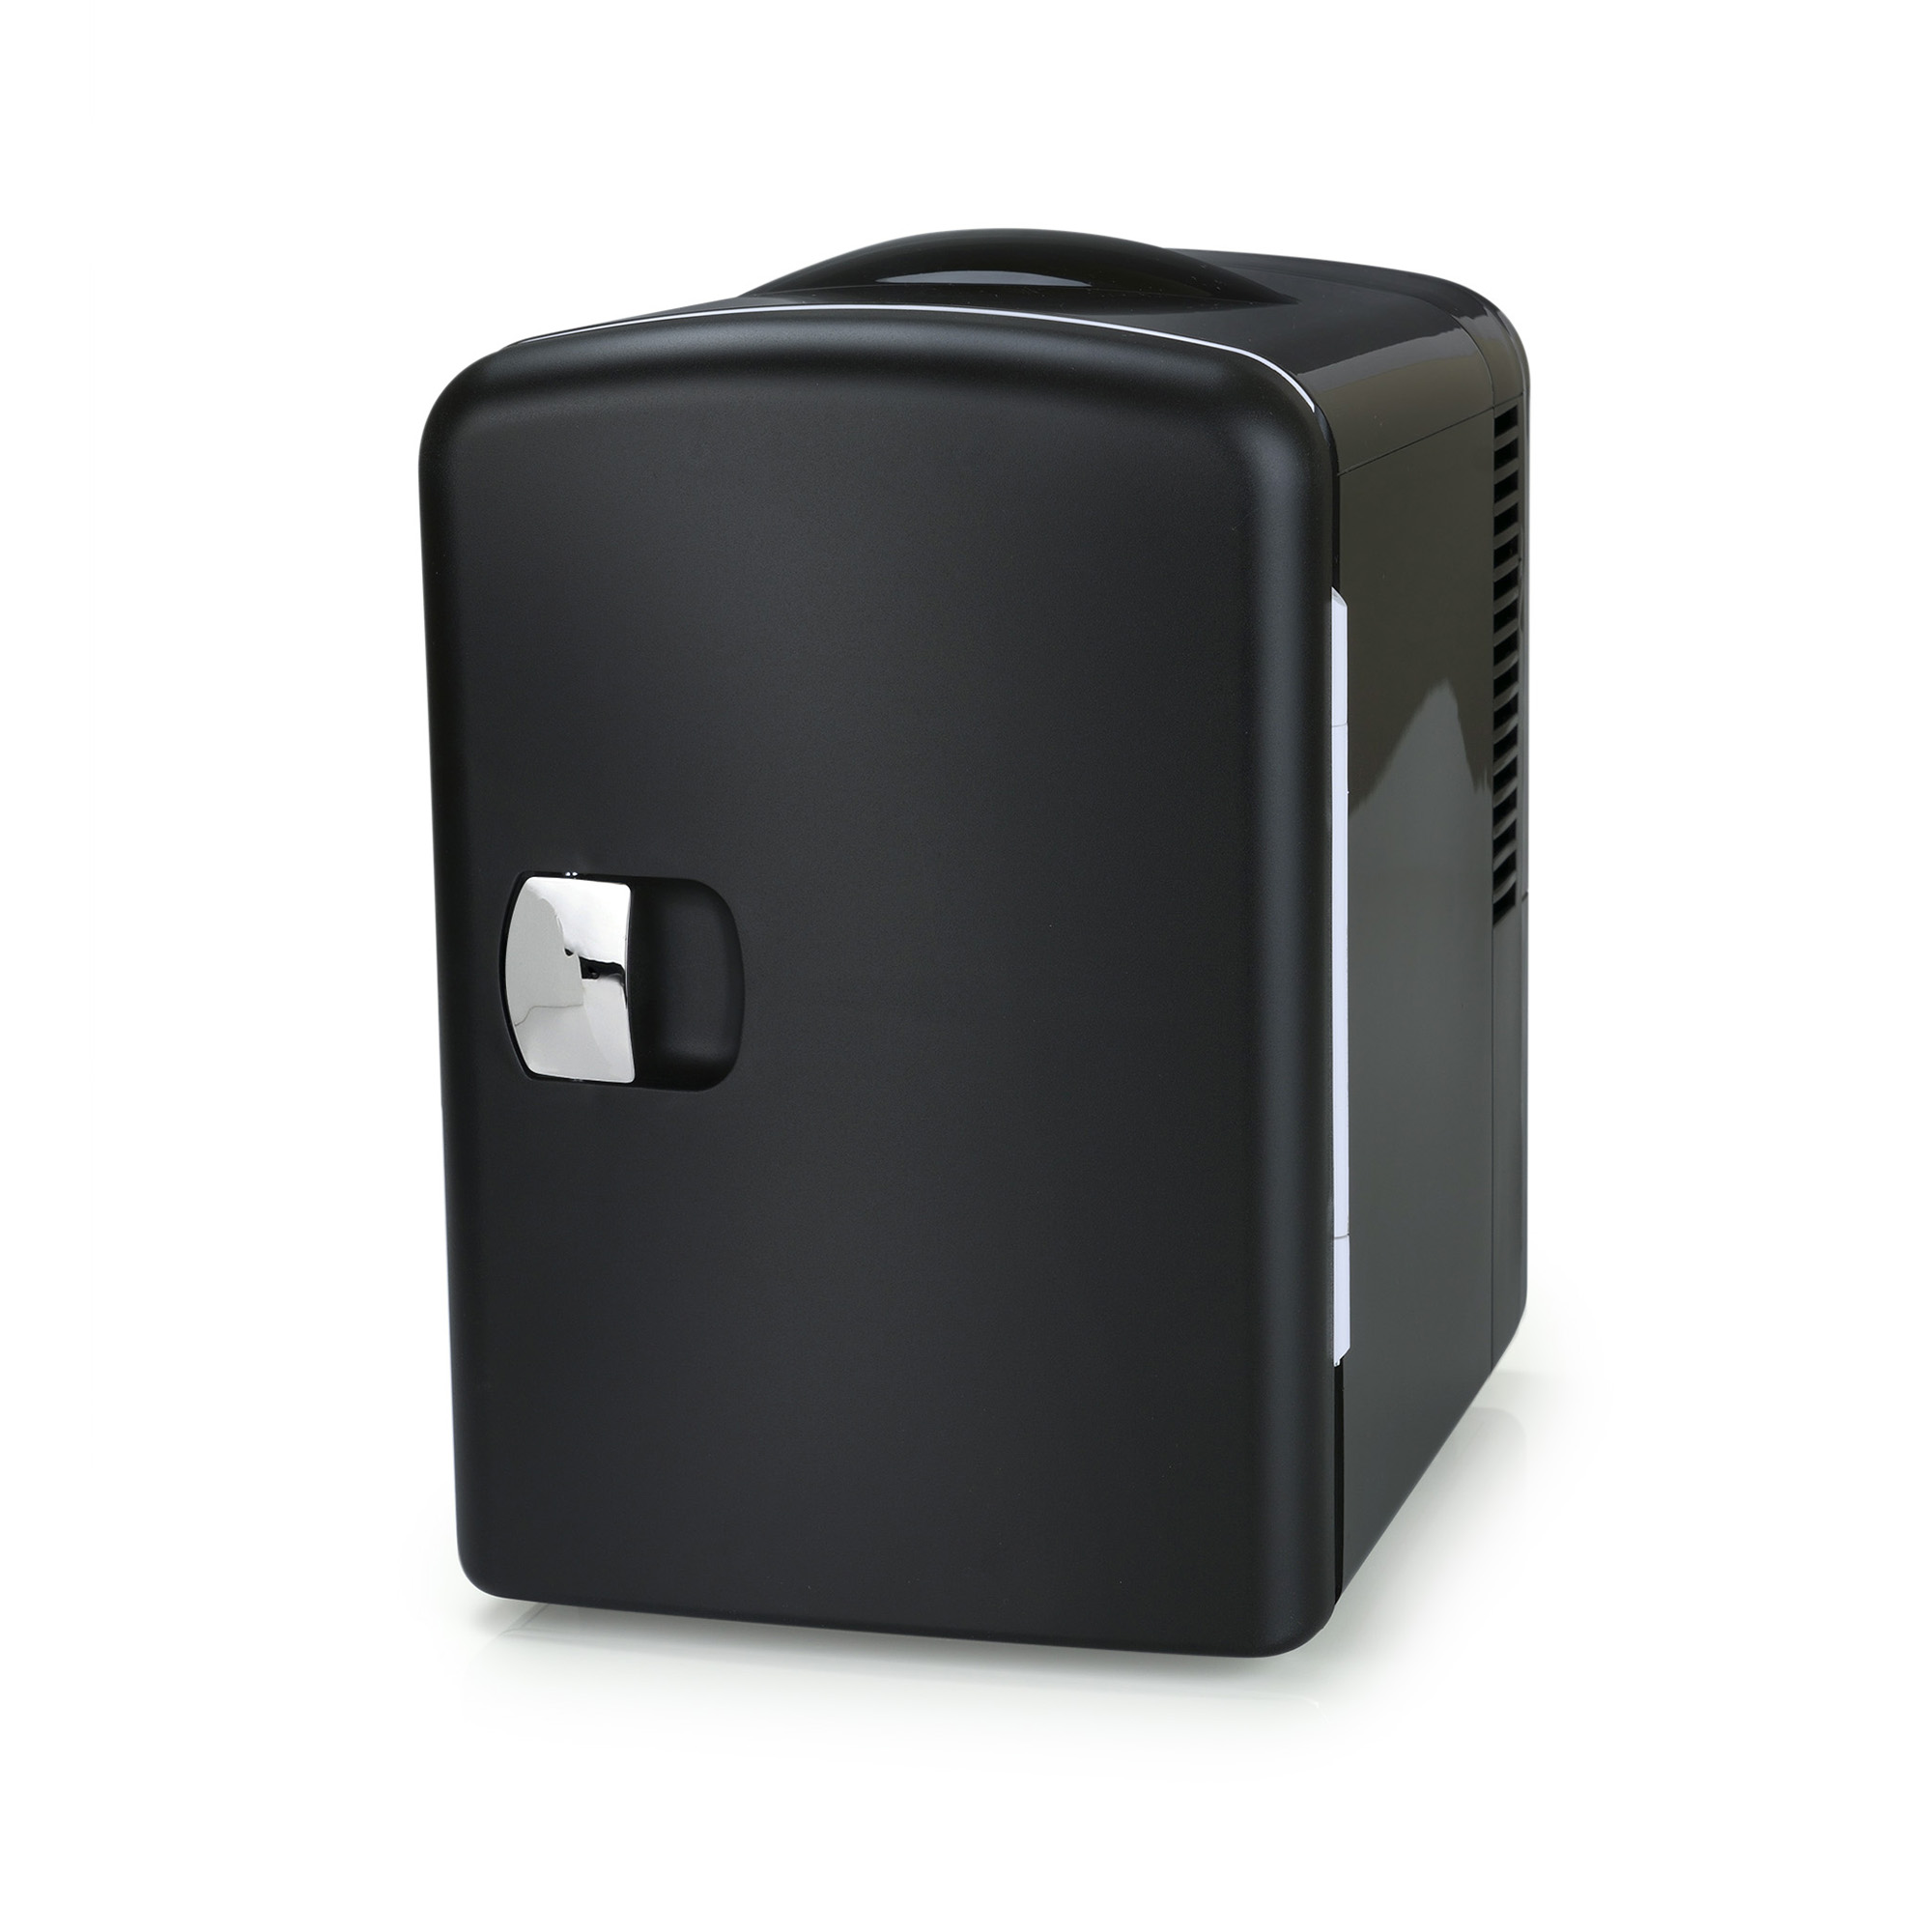 Personal Chiller 6 Can Mini Fridge Beverage and Skincare Refrigerator, Black - image 1 of 5